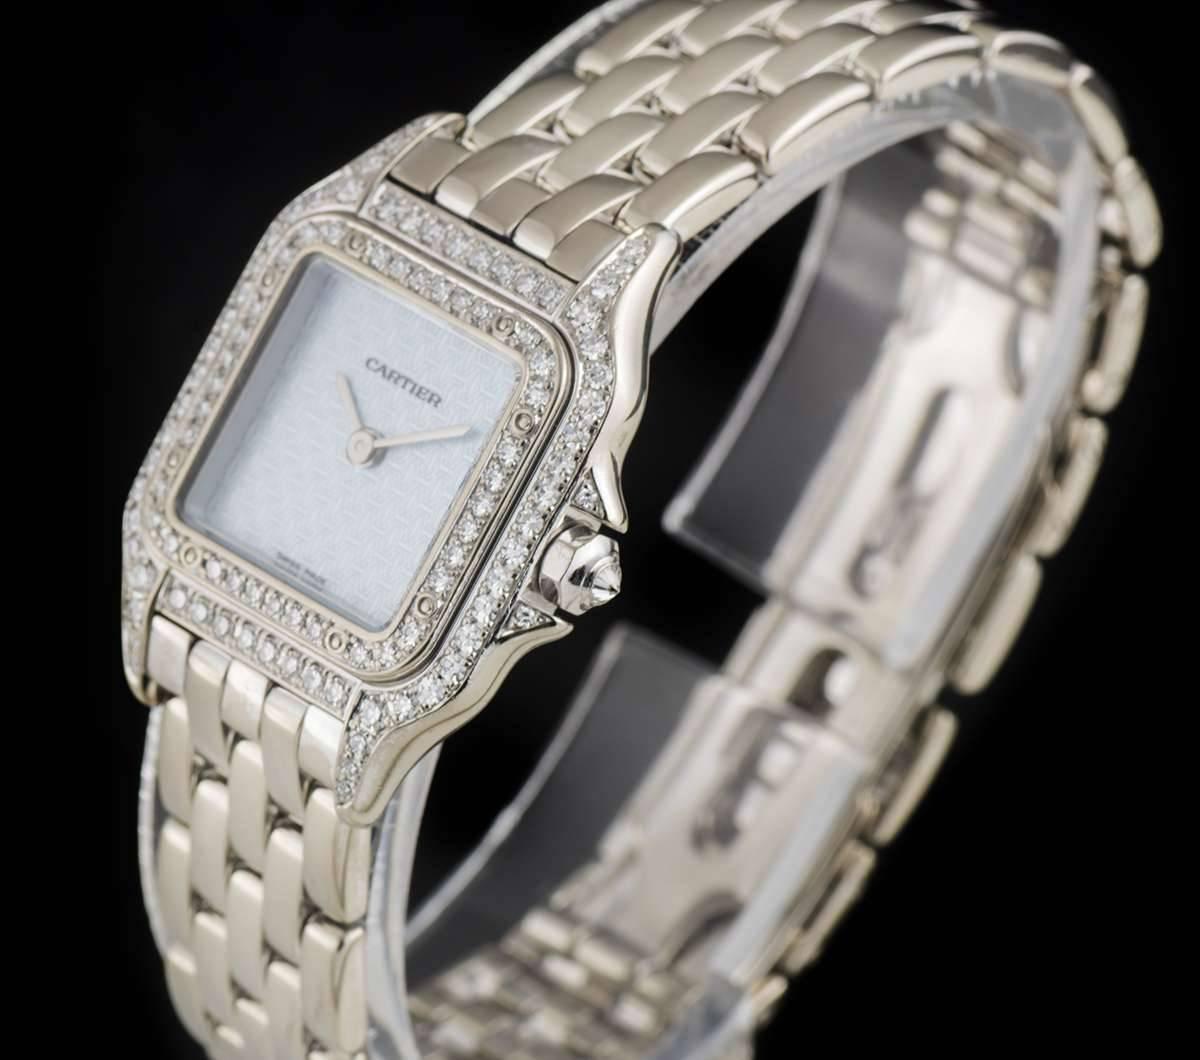 A White Gold Panthere Ladies Wristwatch, sky blue enamel logo dial, a fixed white gold bezel set with approximately 32 round brilliant cut diamonds, white gold case, lugs and crown guard set with approximately 62 round brilliant cut diamonds, a